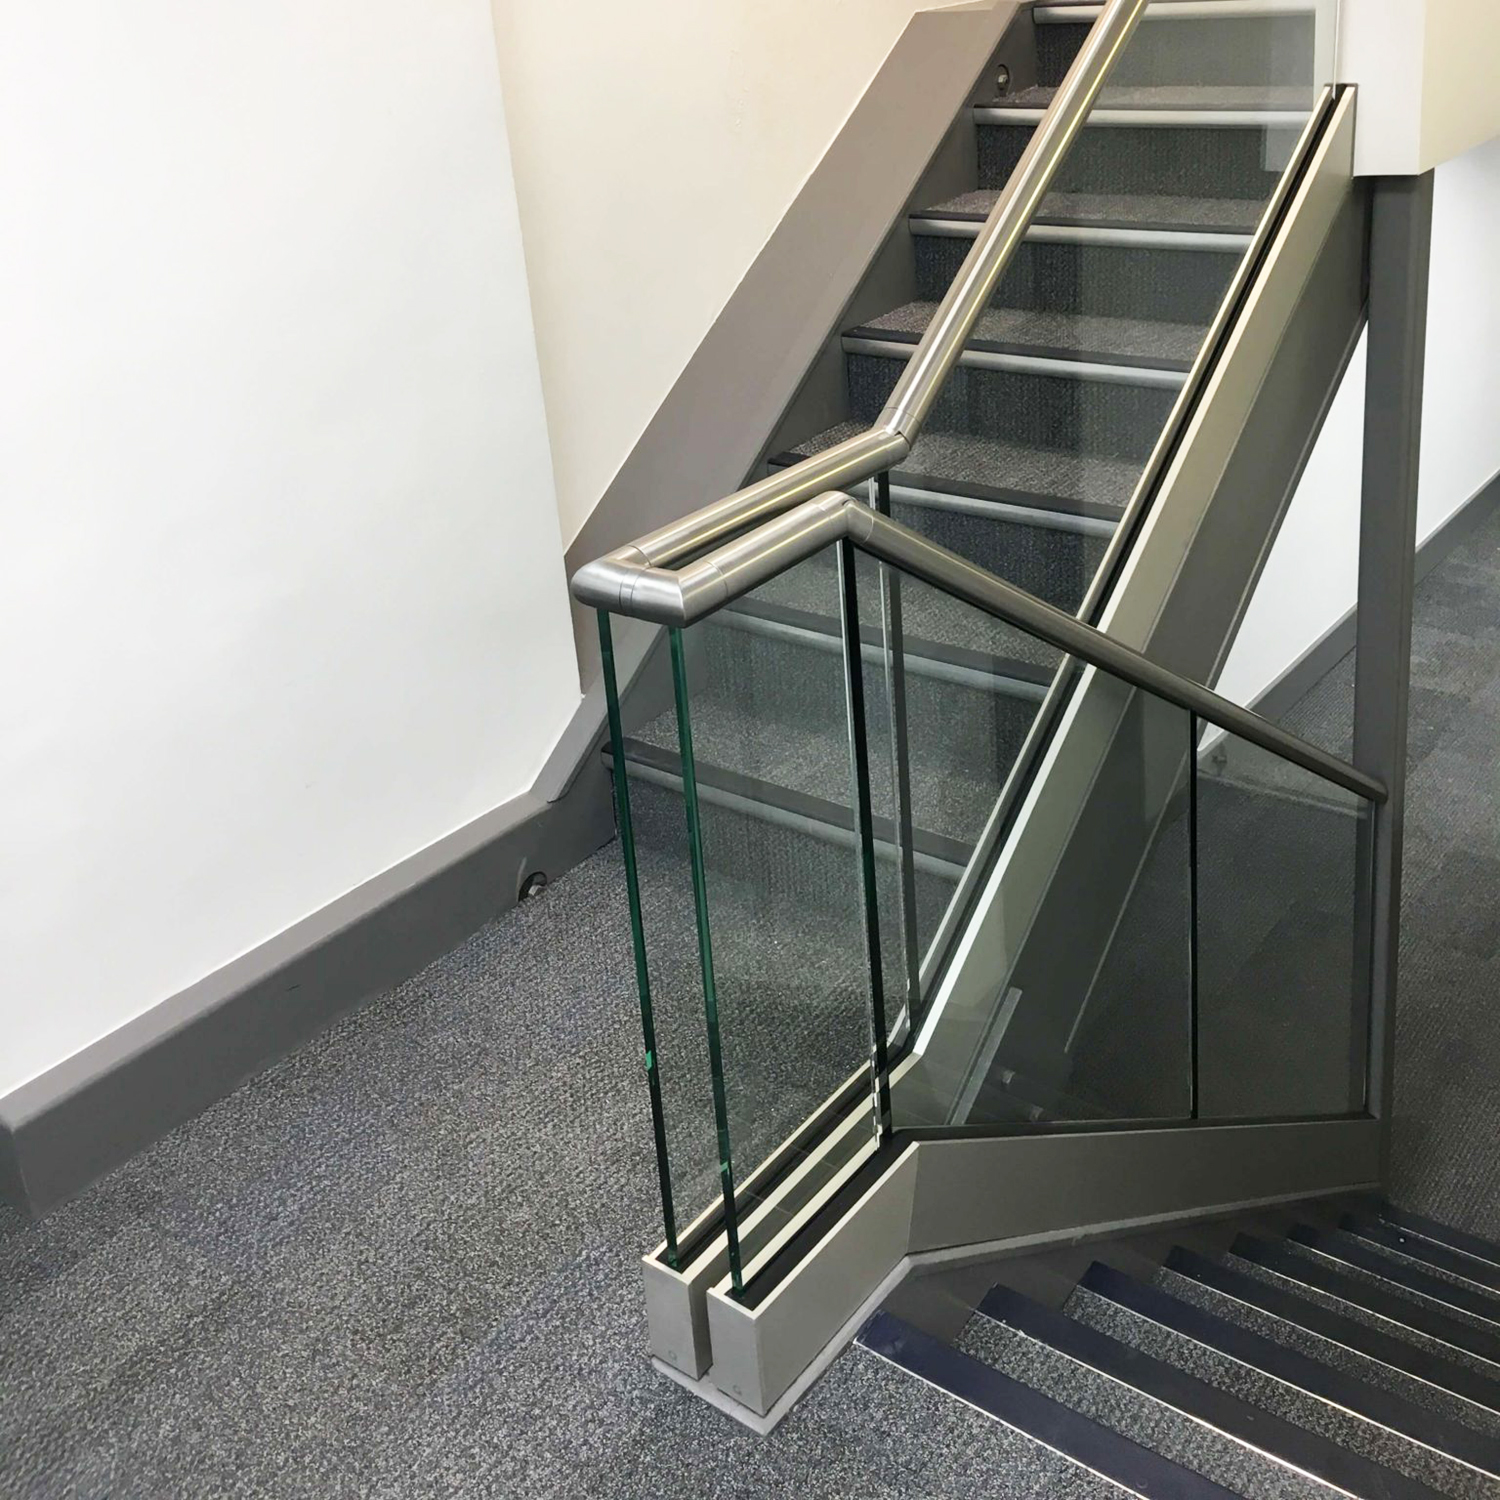 Stair corner with In-floor All Glass Railing System